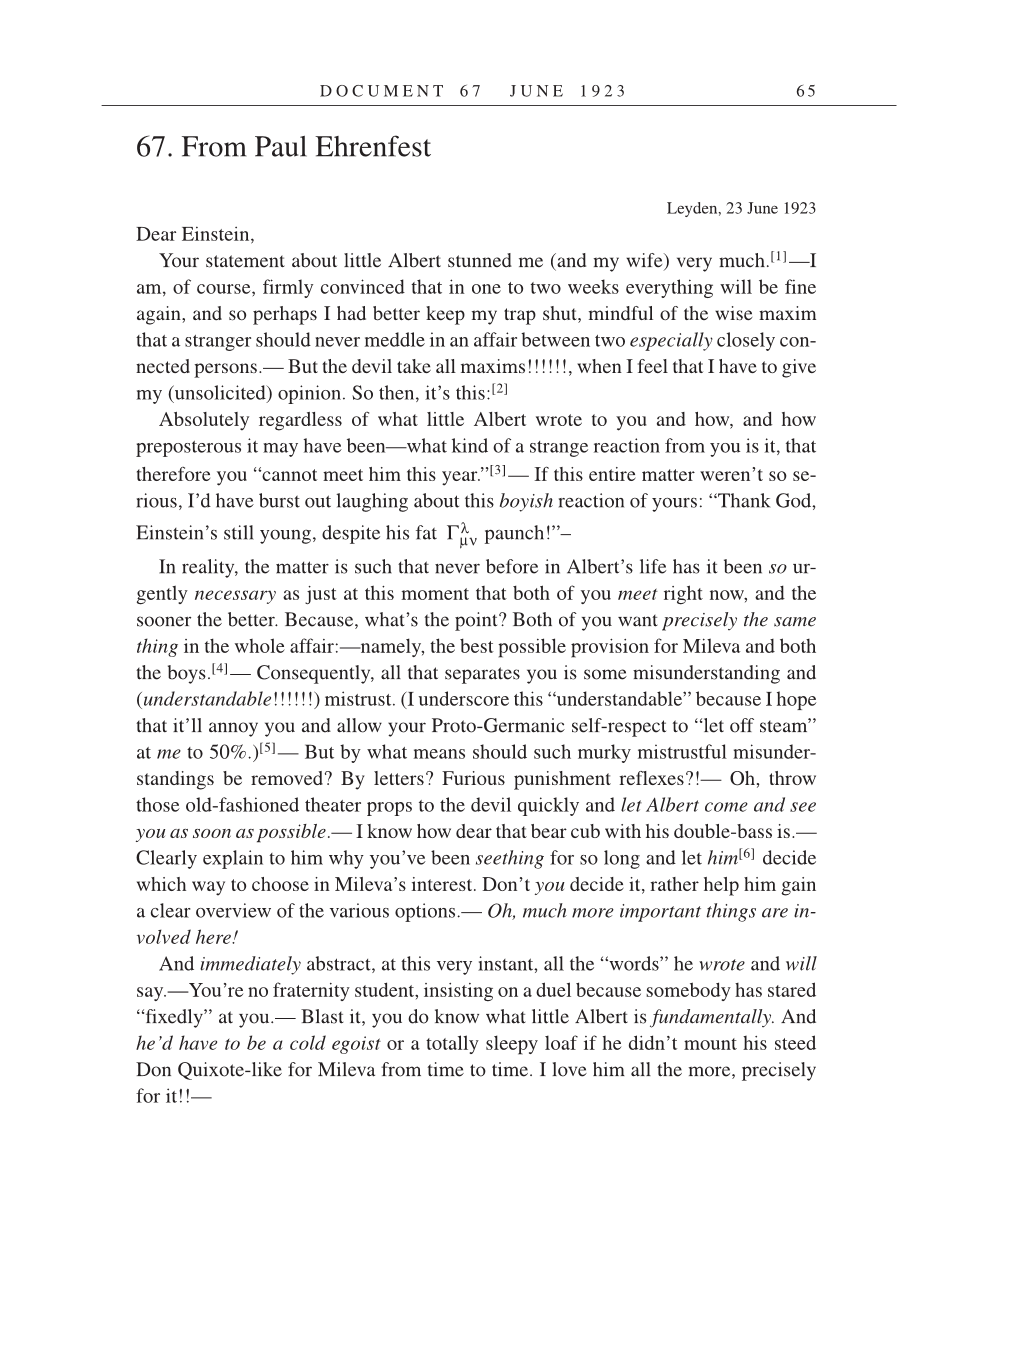 Volume 14: The Berlin Years: Writings & Correspondence, April 1923-May 1925 (English Translation Supplement) page 65